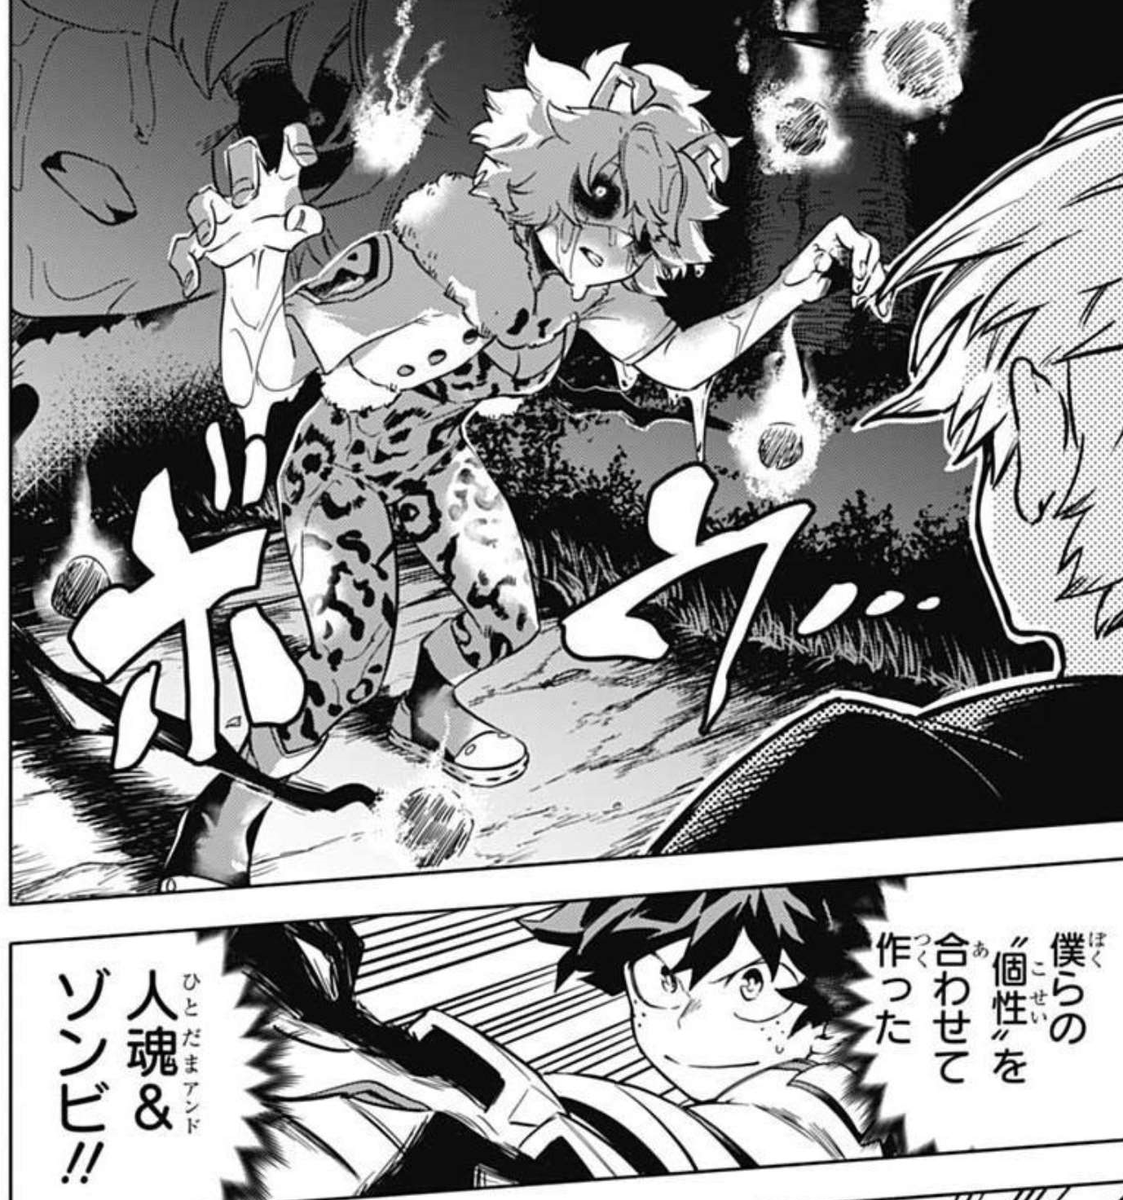 Best panel in the entire chapter: Zombie Mina and hitodamas ghosts, made using Mineta's balls, Todoroki's fire, and Deku's black whip. 